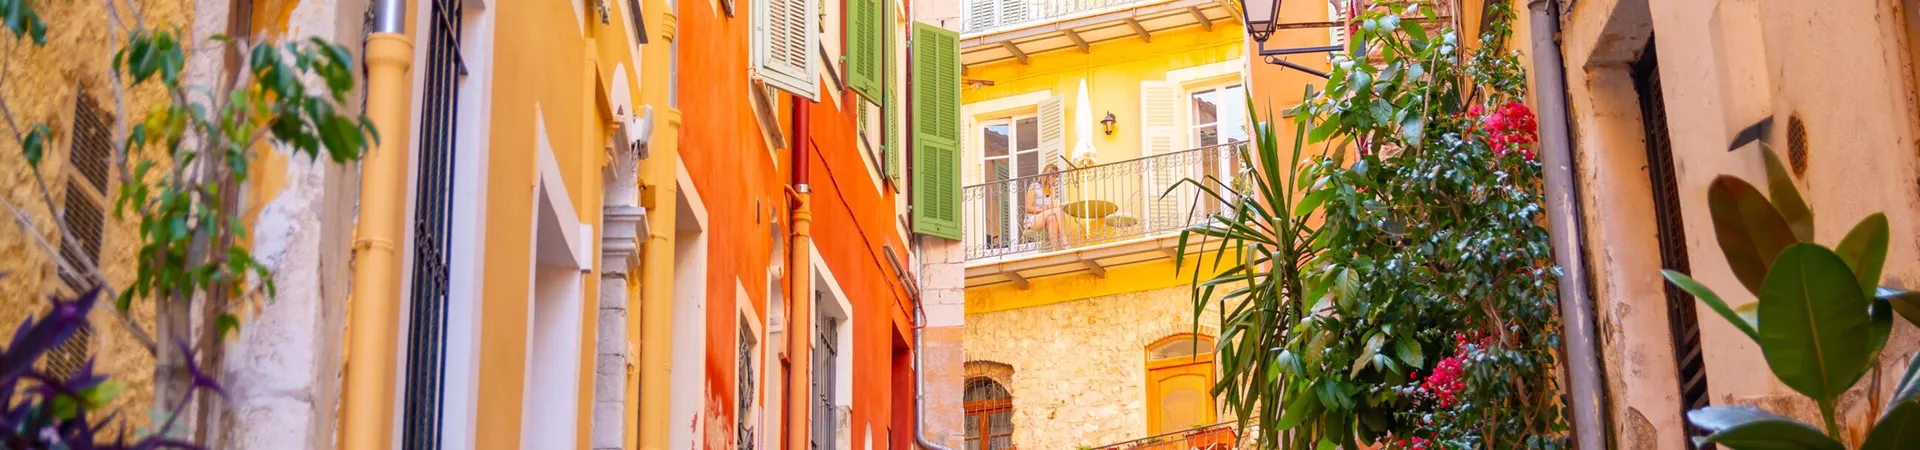 Website Banner Colorful Buildings In Nice On French Riviera, Cote D'azur, Southern France 1068672684 Monaco